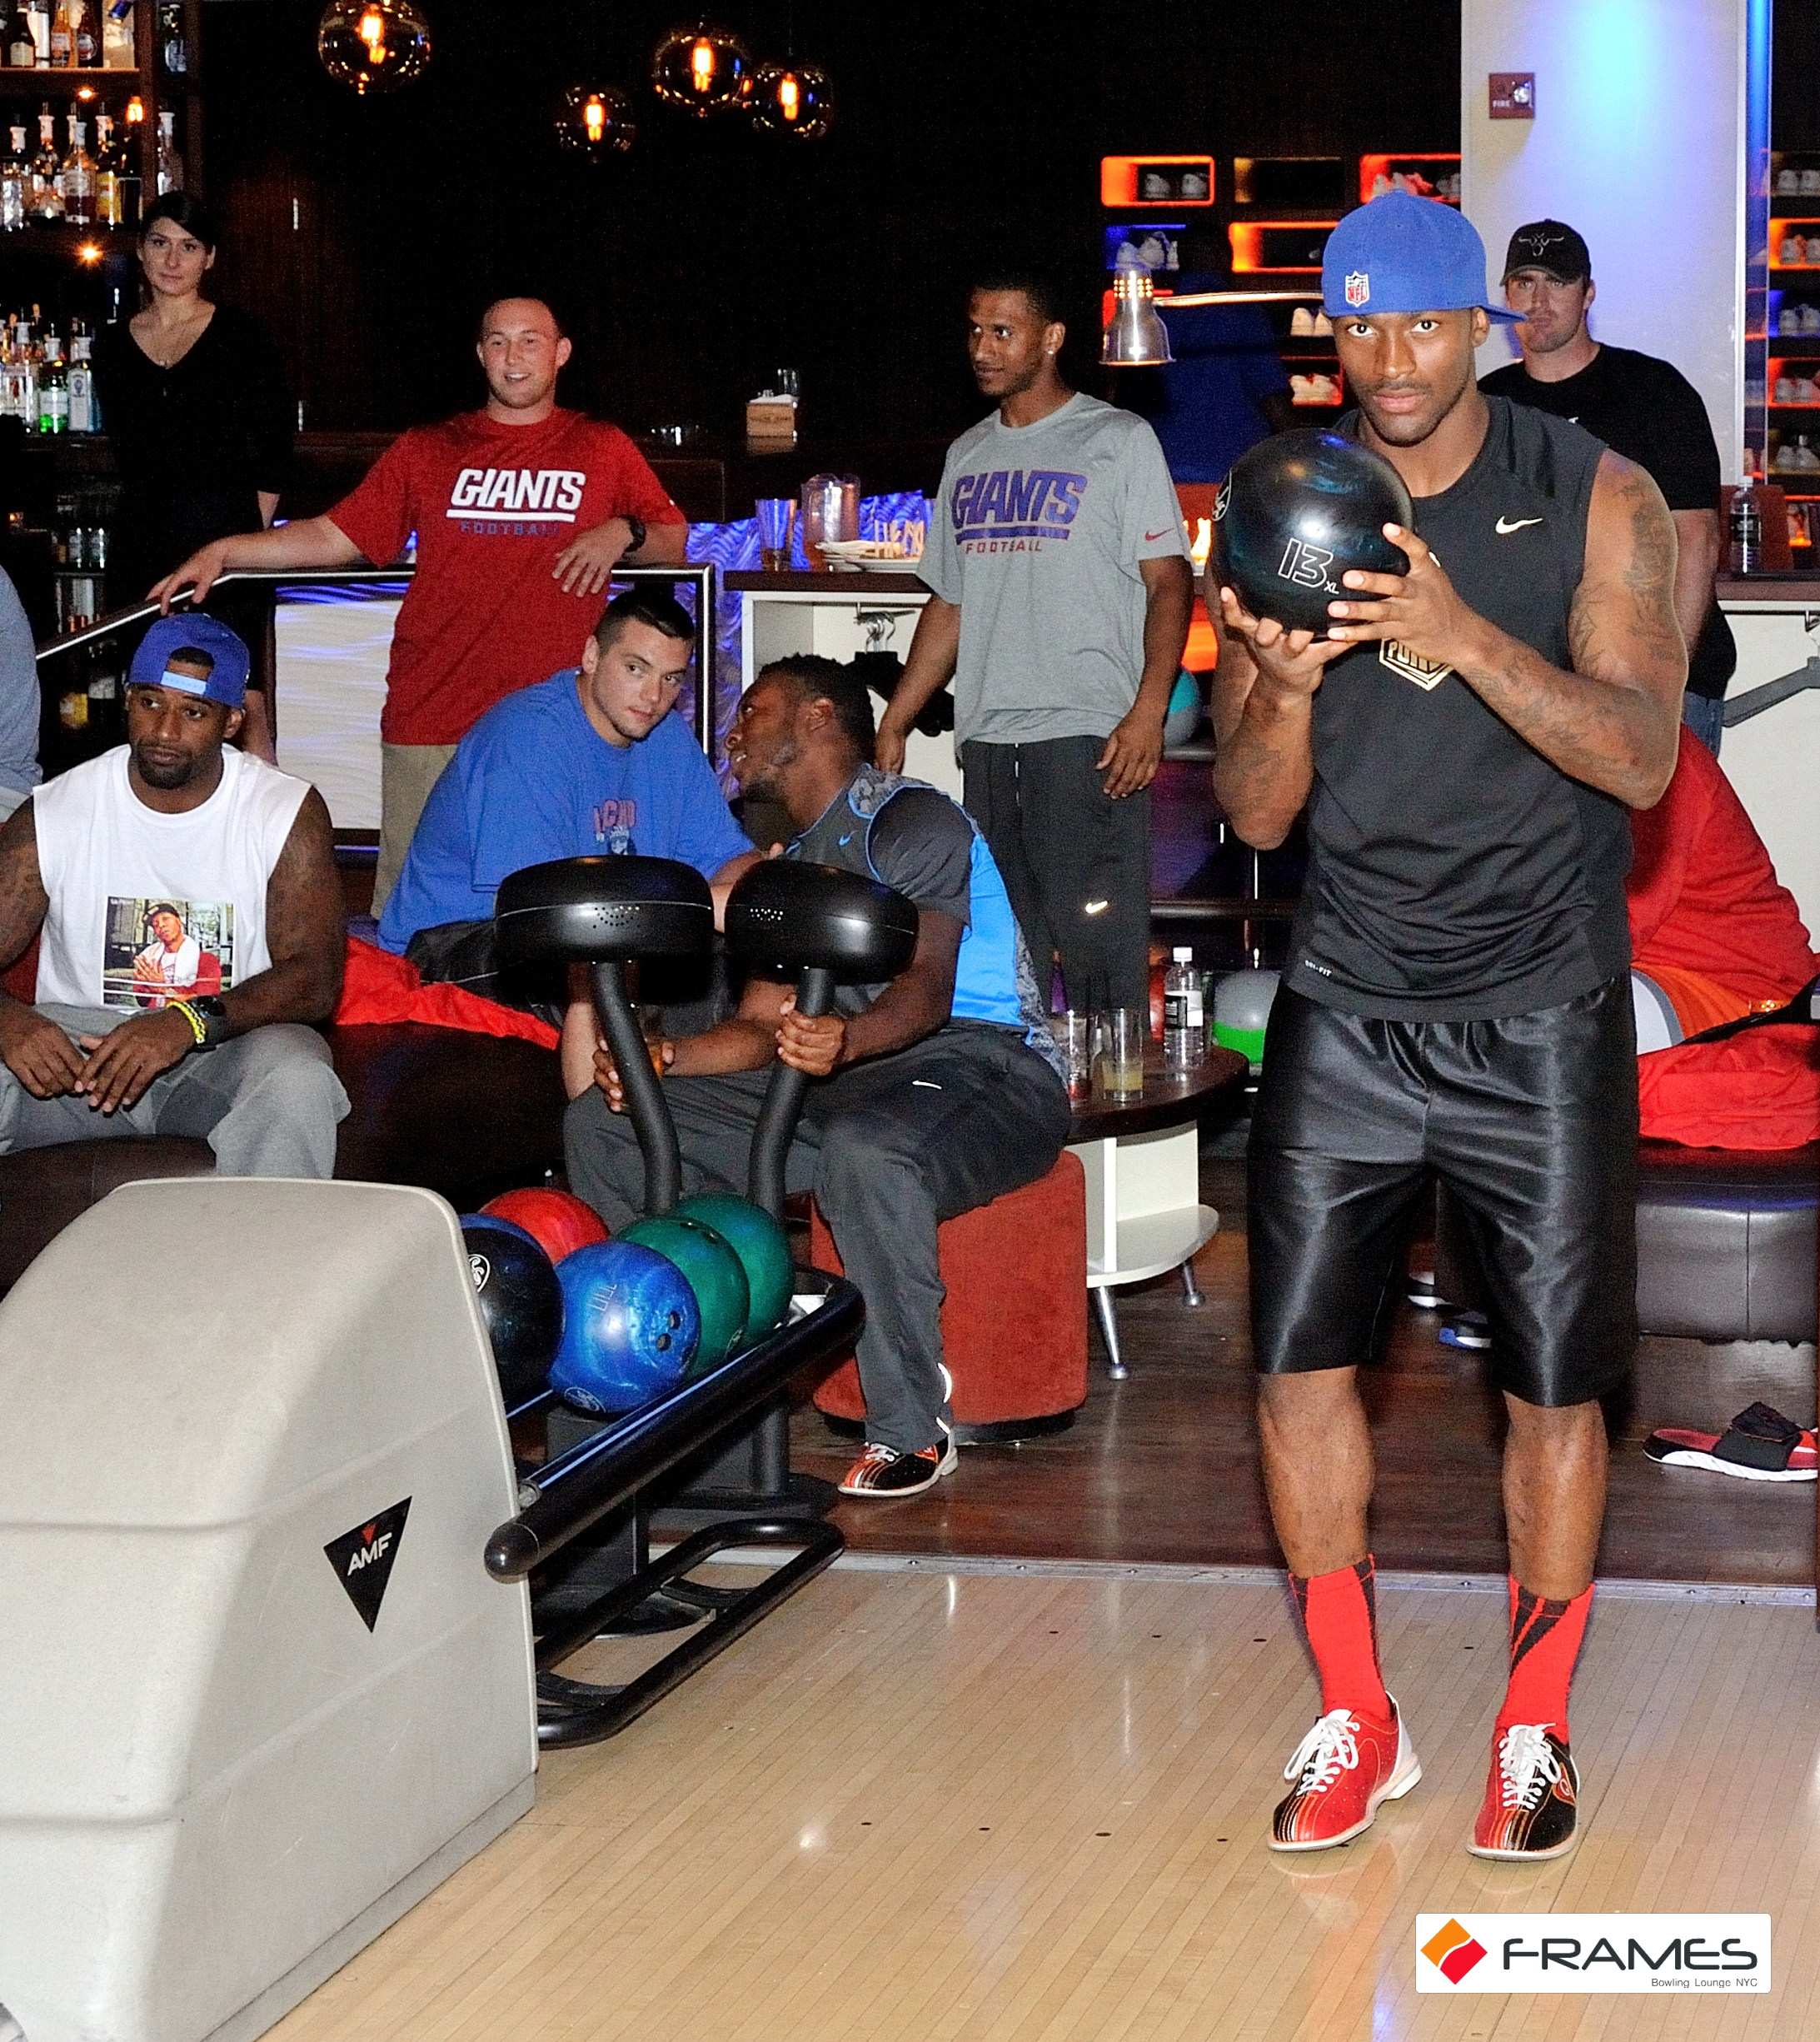 Entire NY GIANTS Football Team Celebrate a Boys Night Out at Frames Bowling Lounge